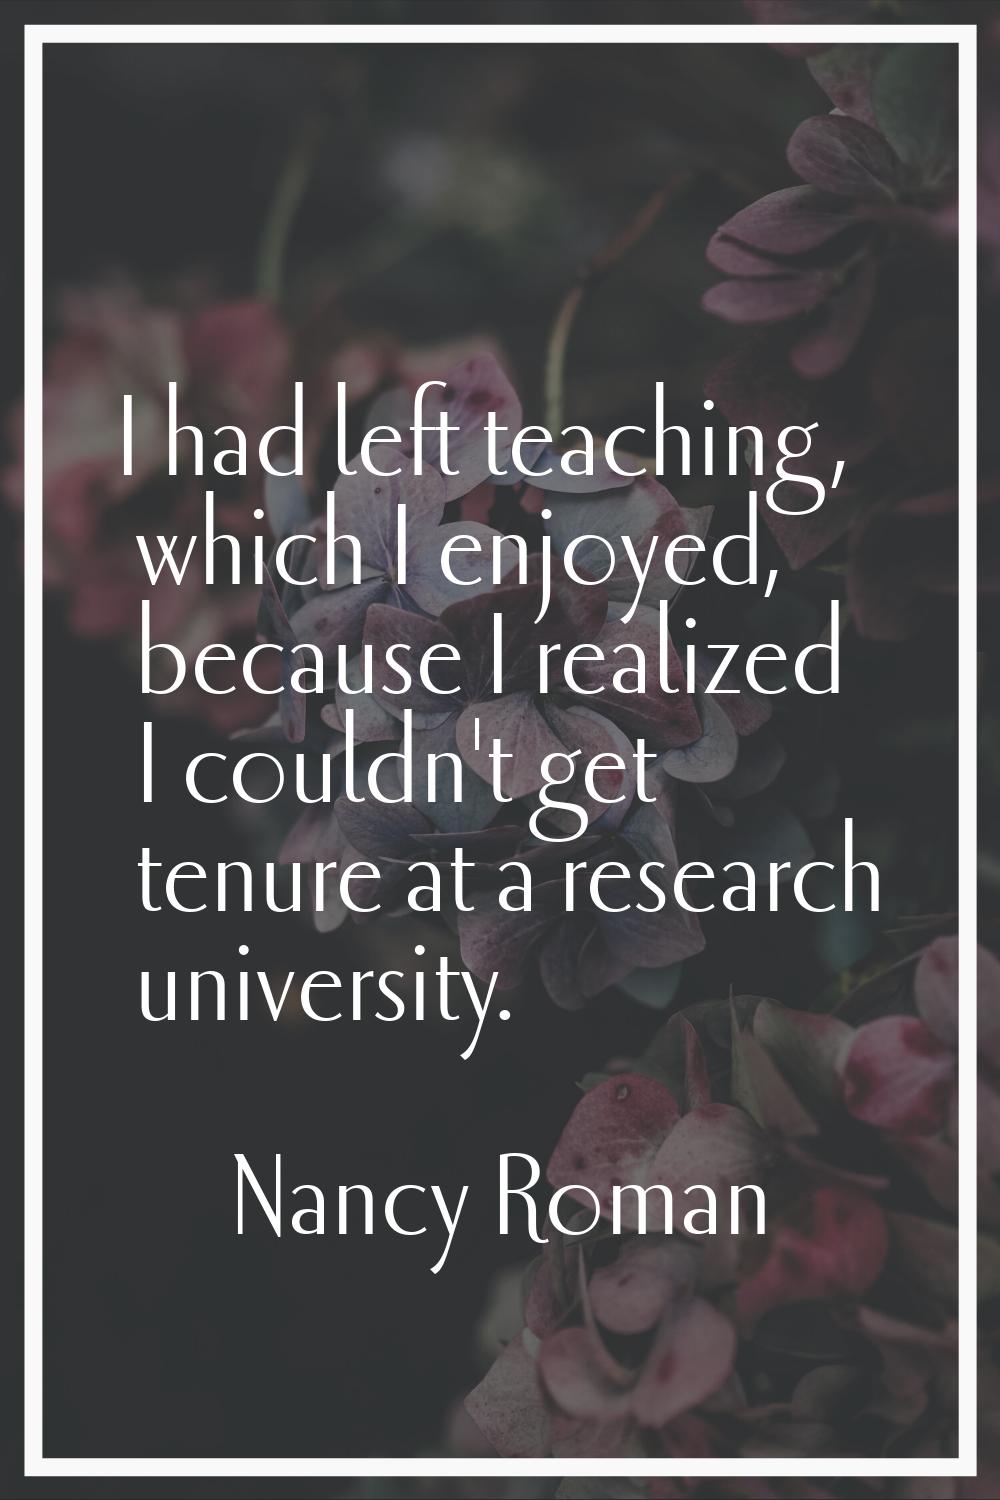 I had left teaching, which I enjoyed, because I realized I couldn't get tenure at a research univer